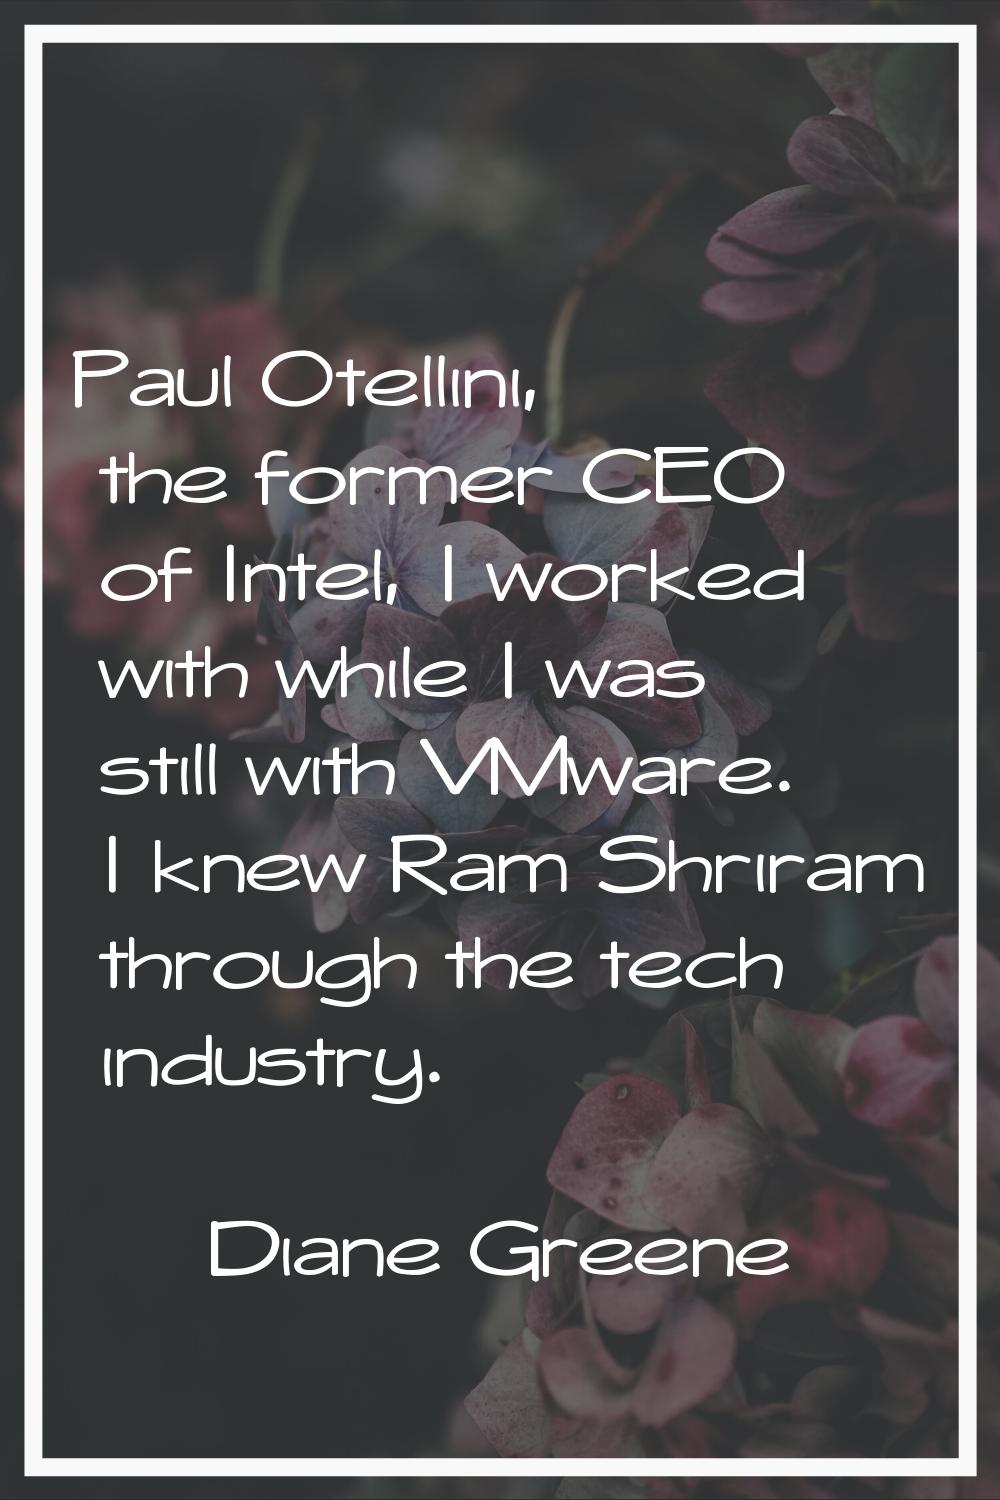 Paul Otellini, the former CEO of Intel, I worked with while I was still with VMware. I knew Ram Shr